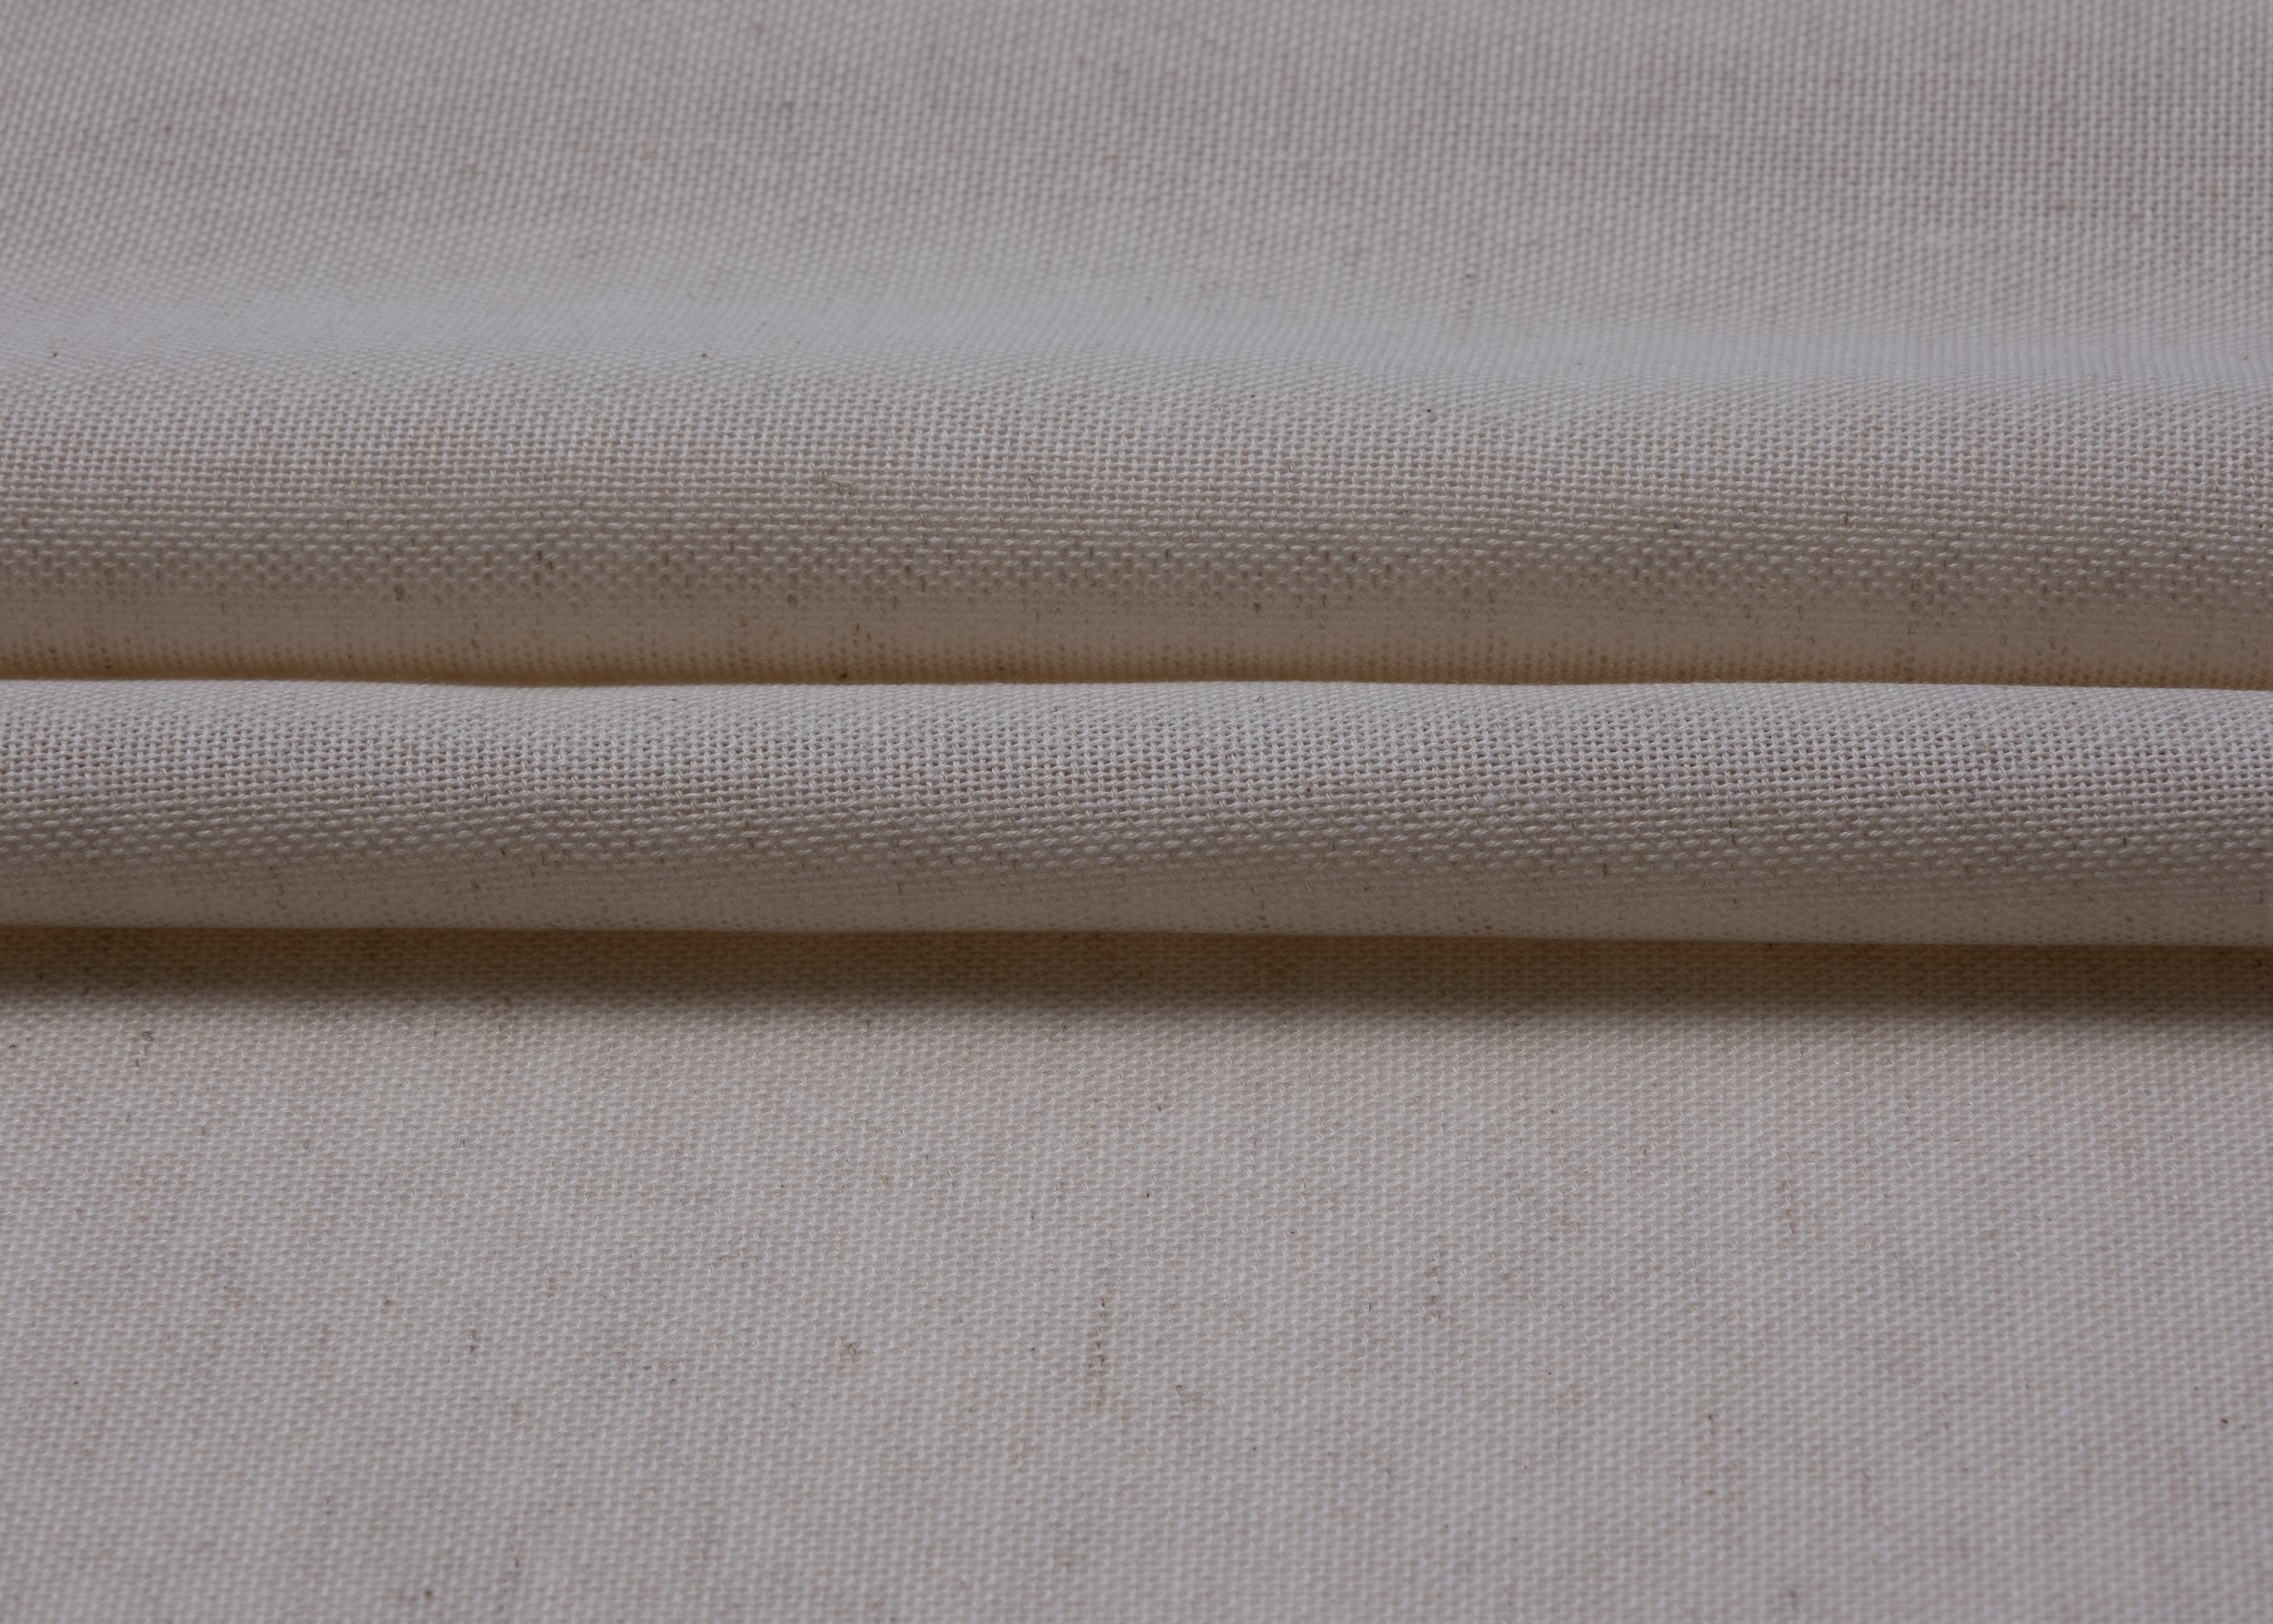 Evenweave Linen embroidery fabric 30 Ct